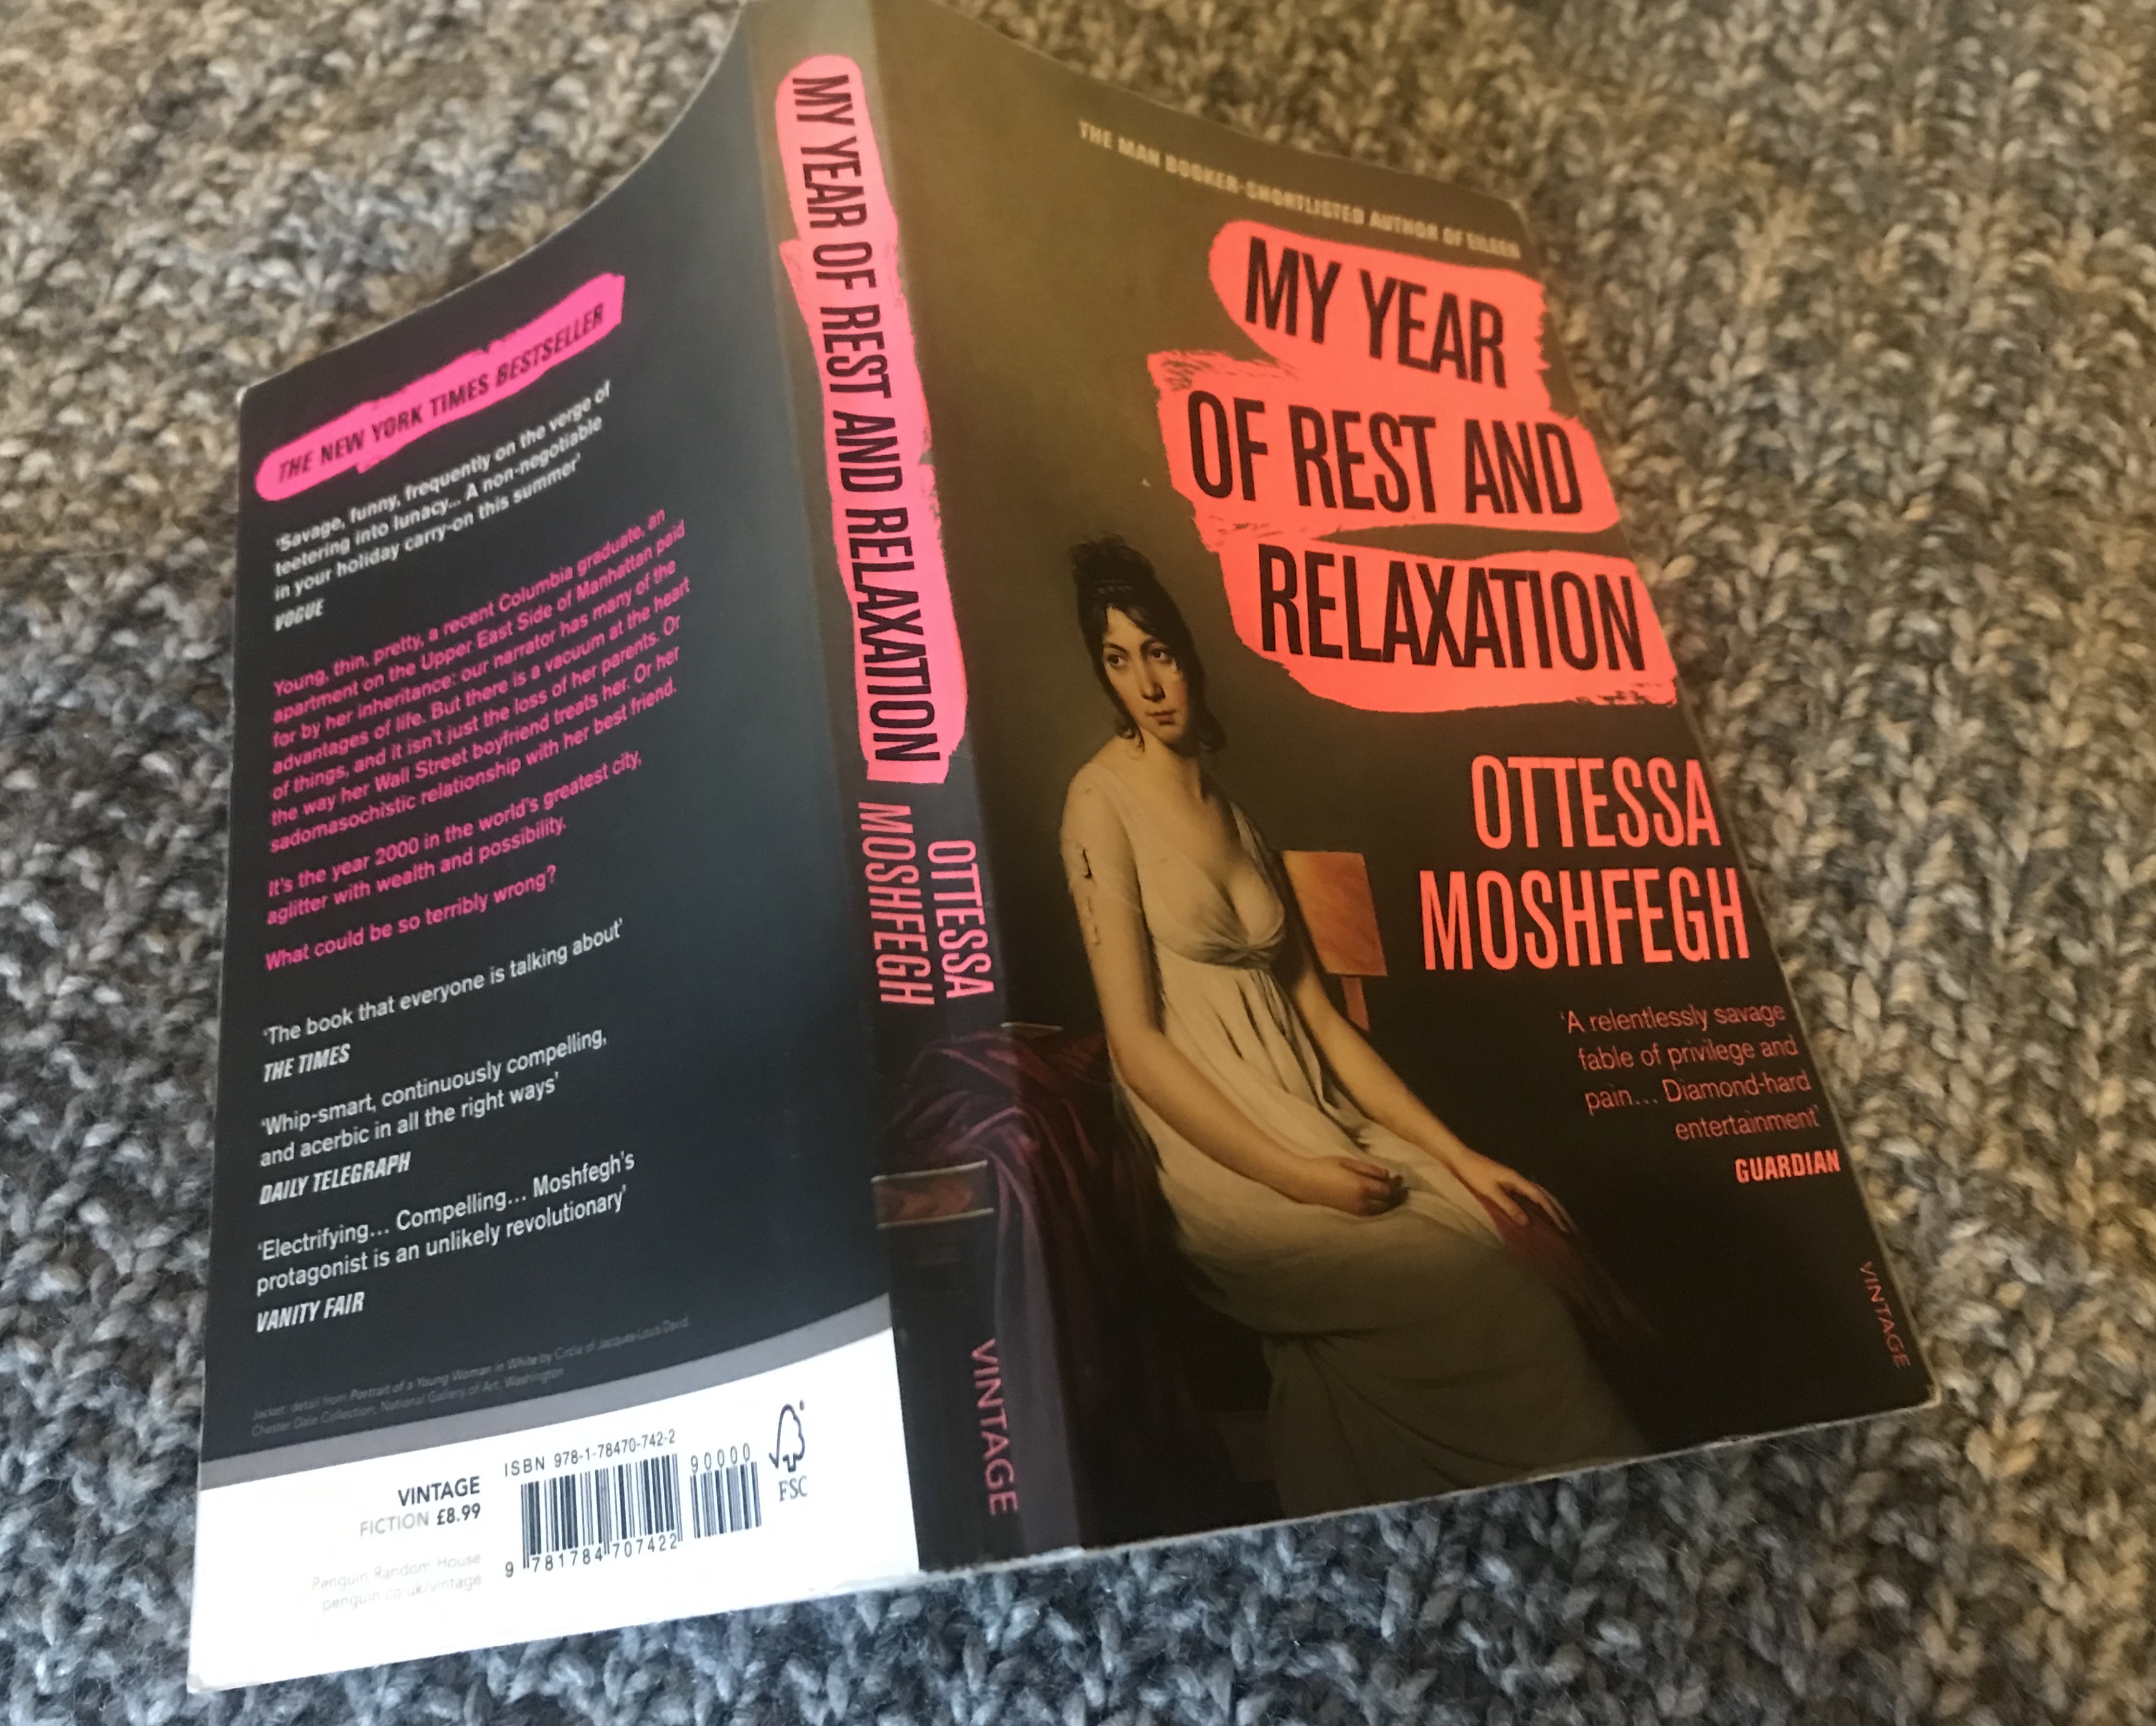 Book review – “My Year of Rest and Relaxation” – The Gallery